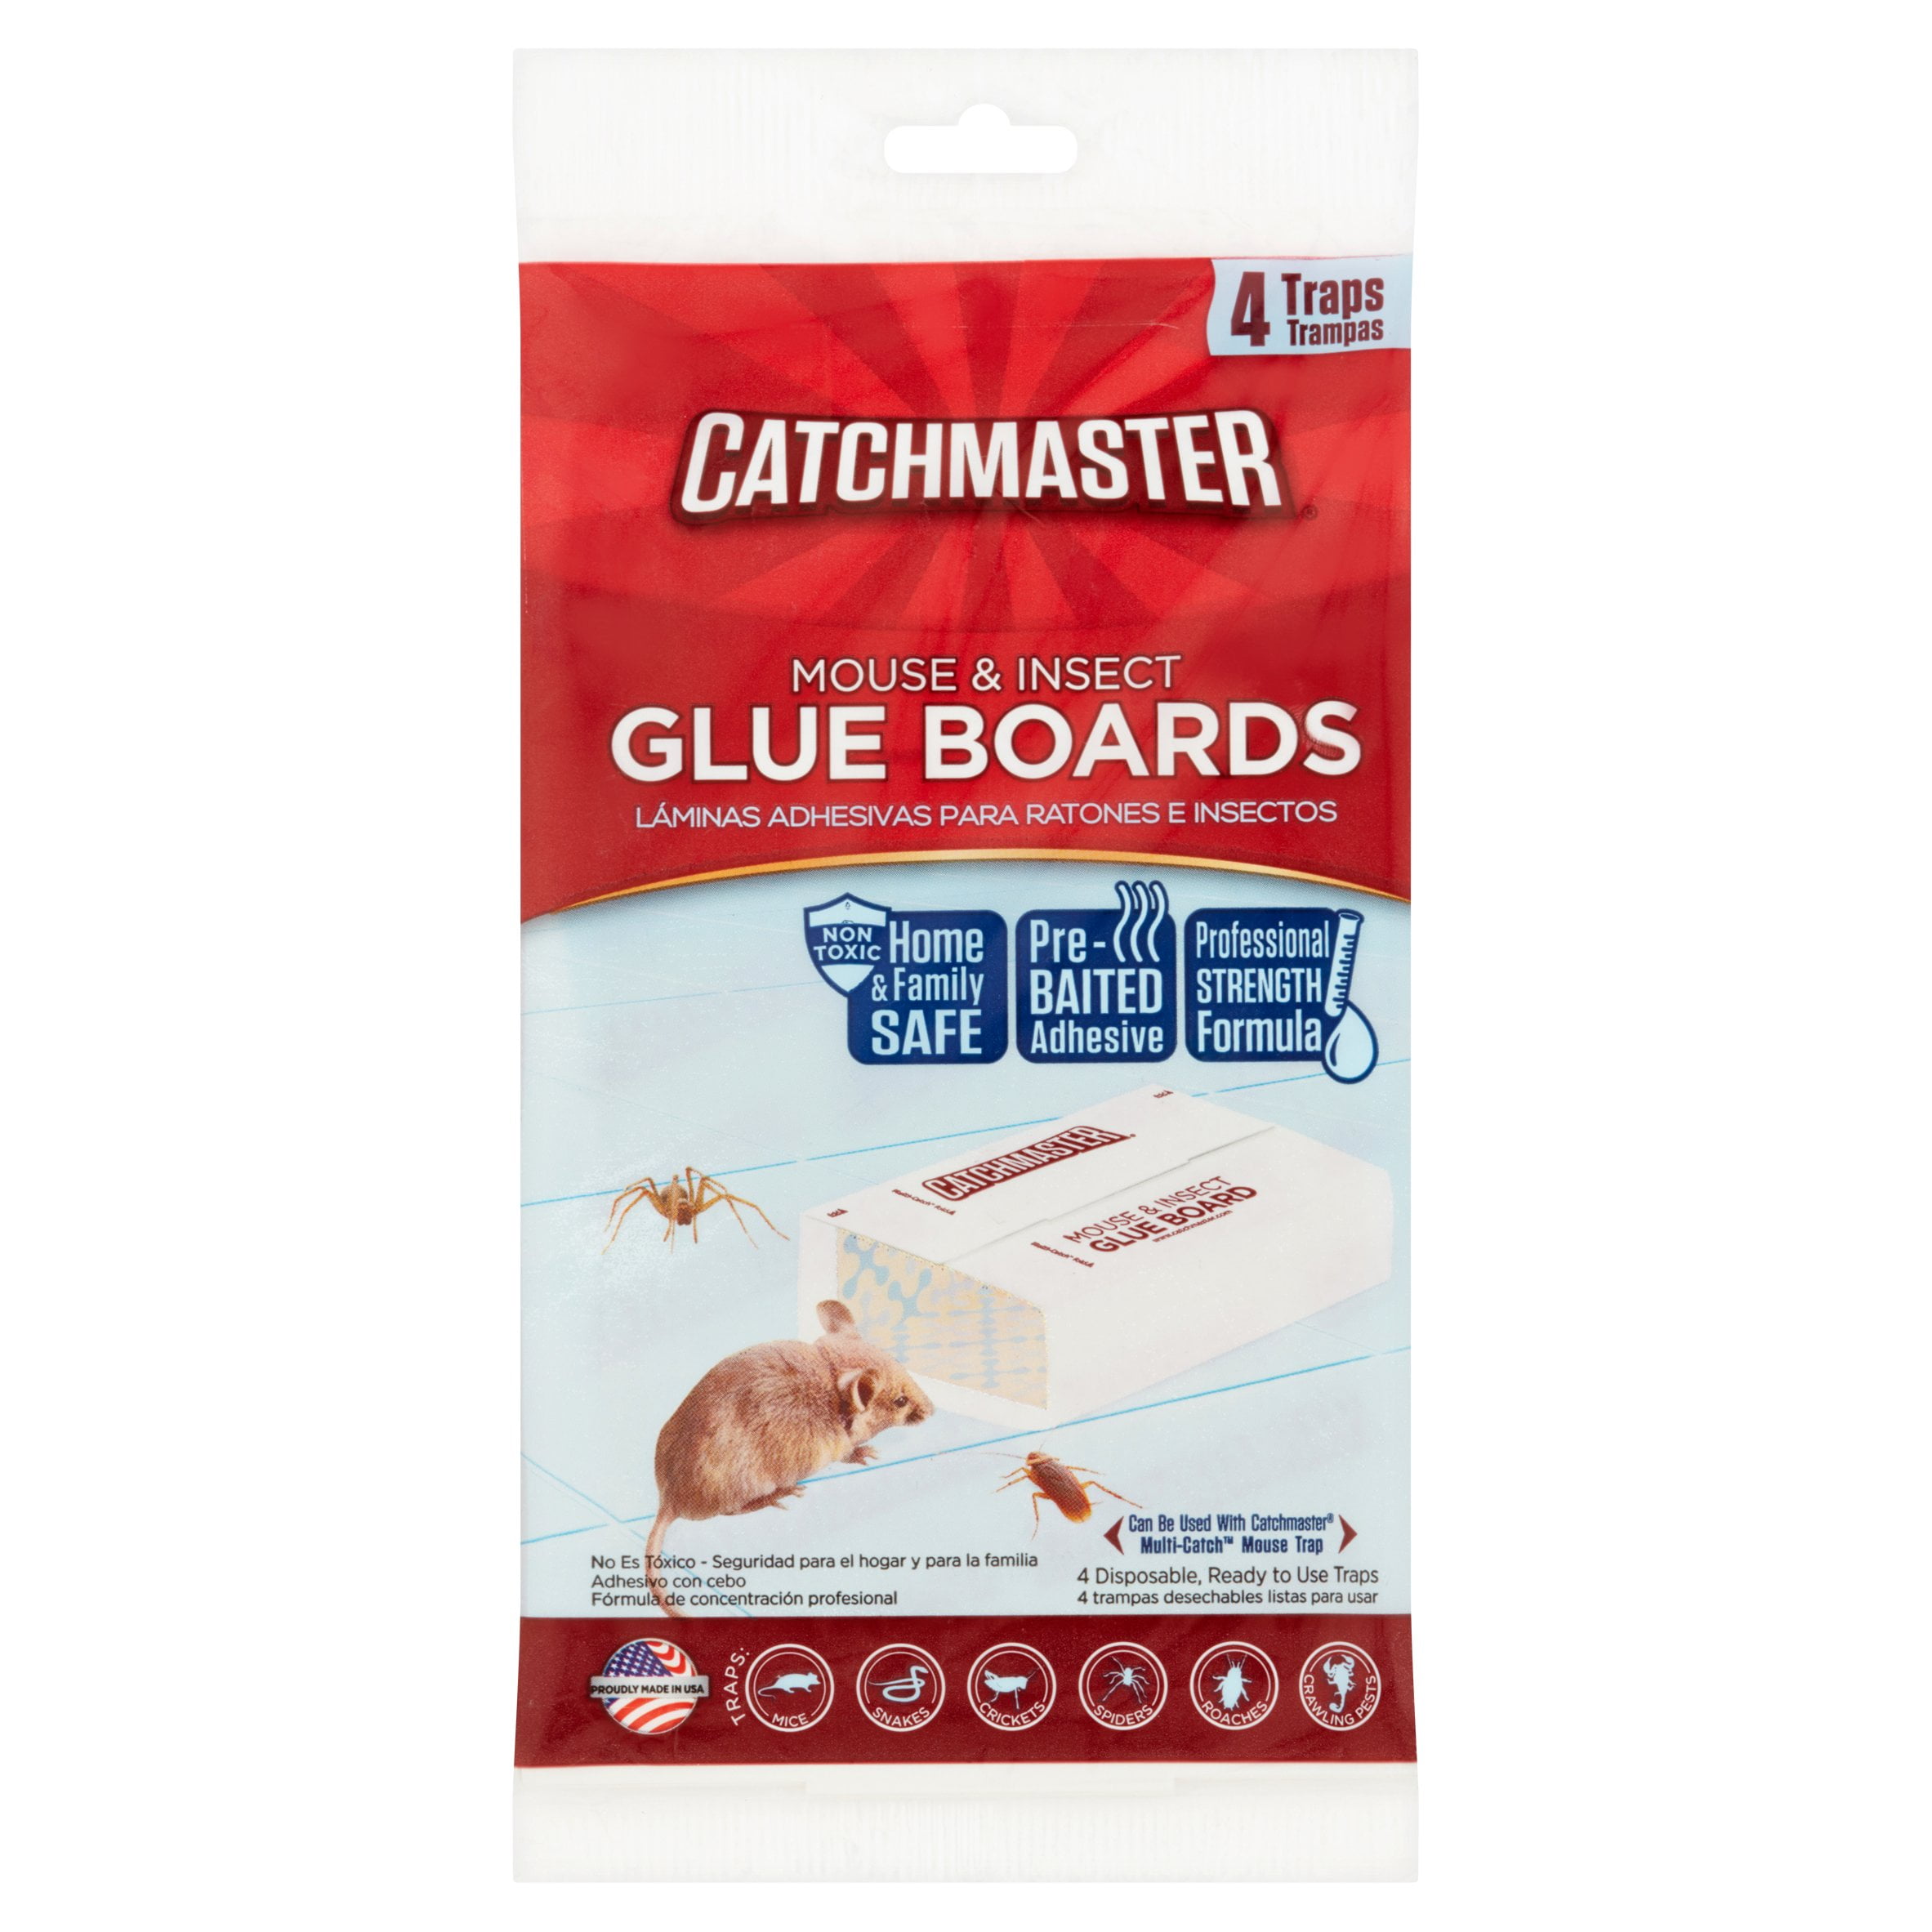 CATCHGENIUS ROACH INSECT TRAP Sticky Glue Boards Baited 4 TRAP/PCK FAST SHIPPING 